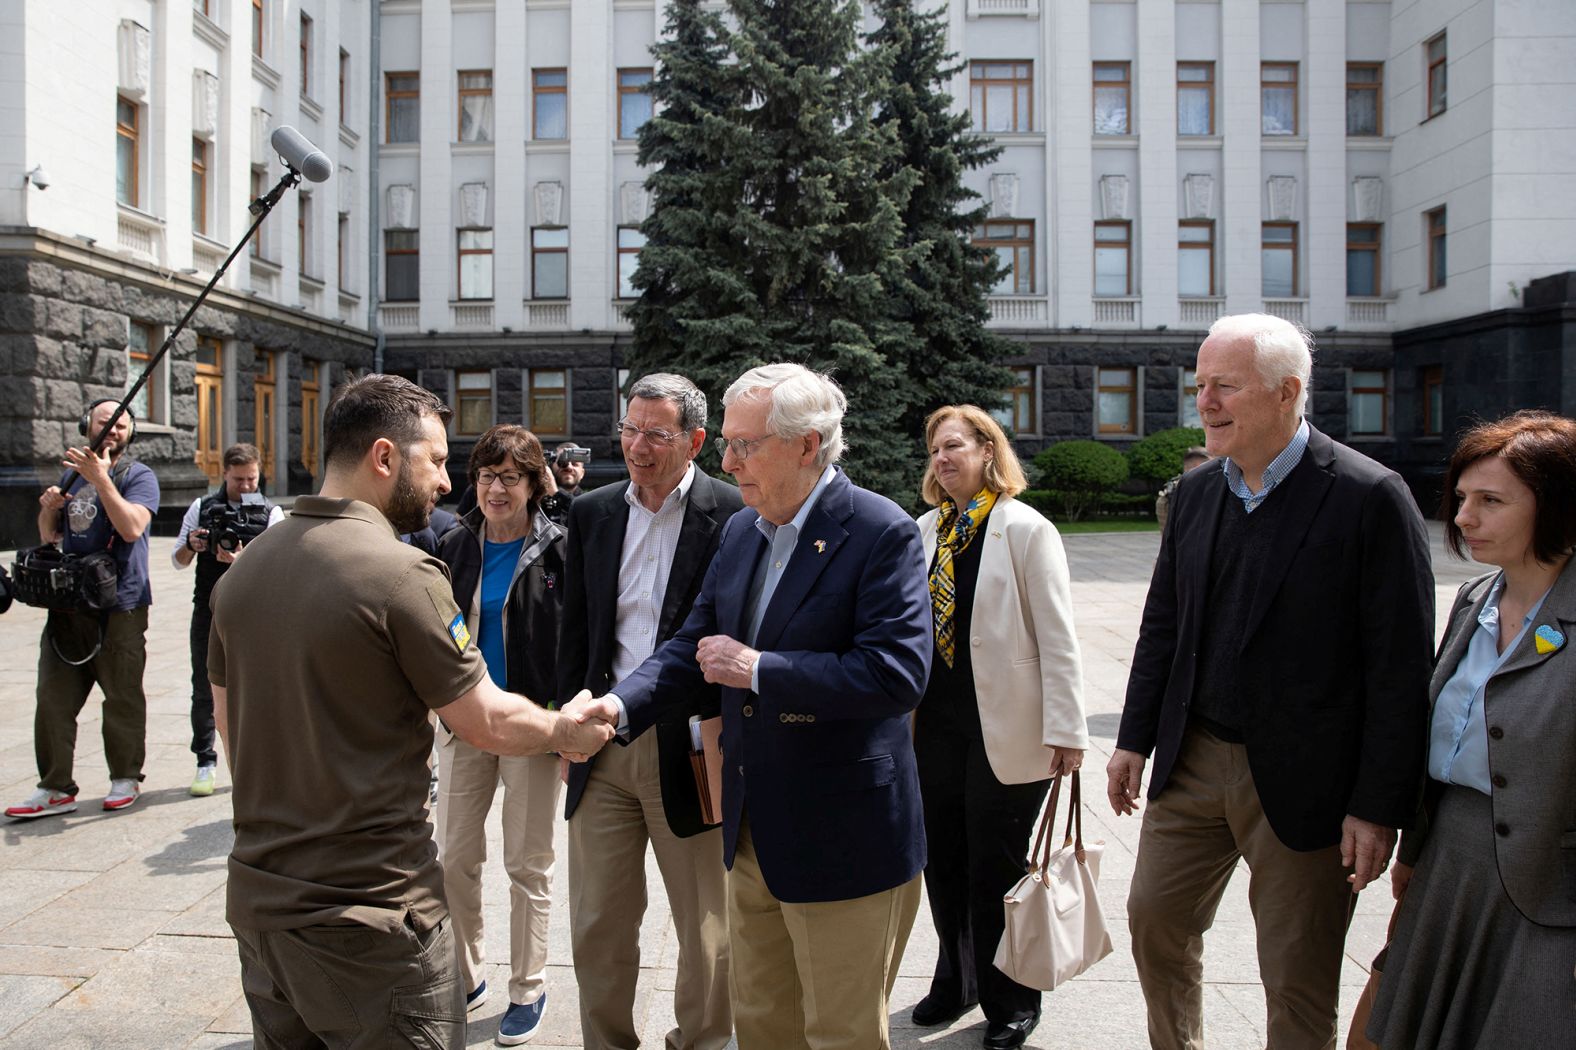 Ukrainian President Volodymyr Zelensky, left, greets McConnell and other US senators who were visiting Ukraine in May 2022.